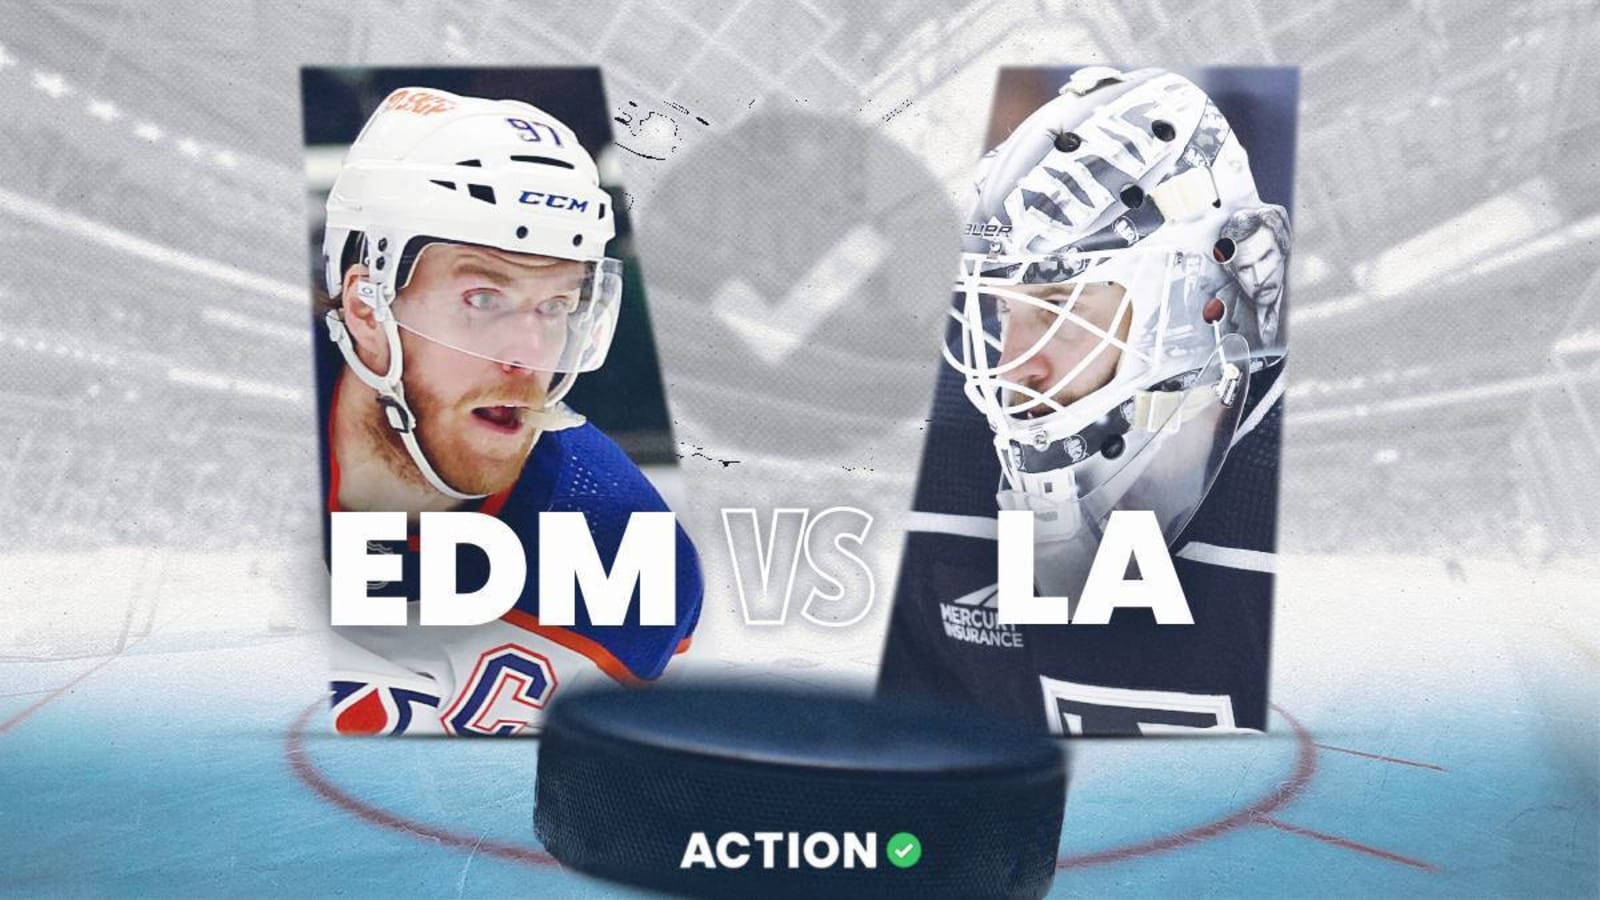 Oilers vs. Kings Game 4 odds, preview, prediction for 4/28: Expect fireworks once again